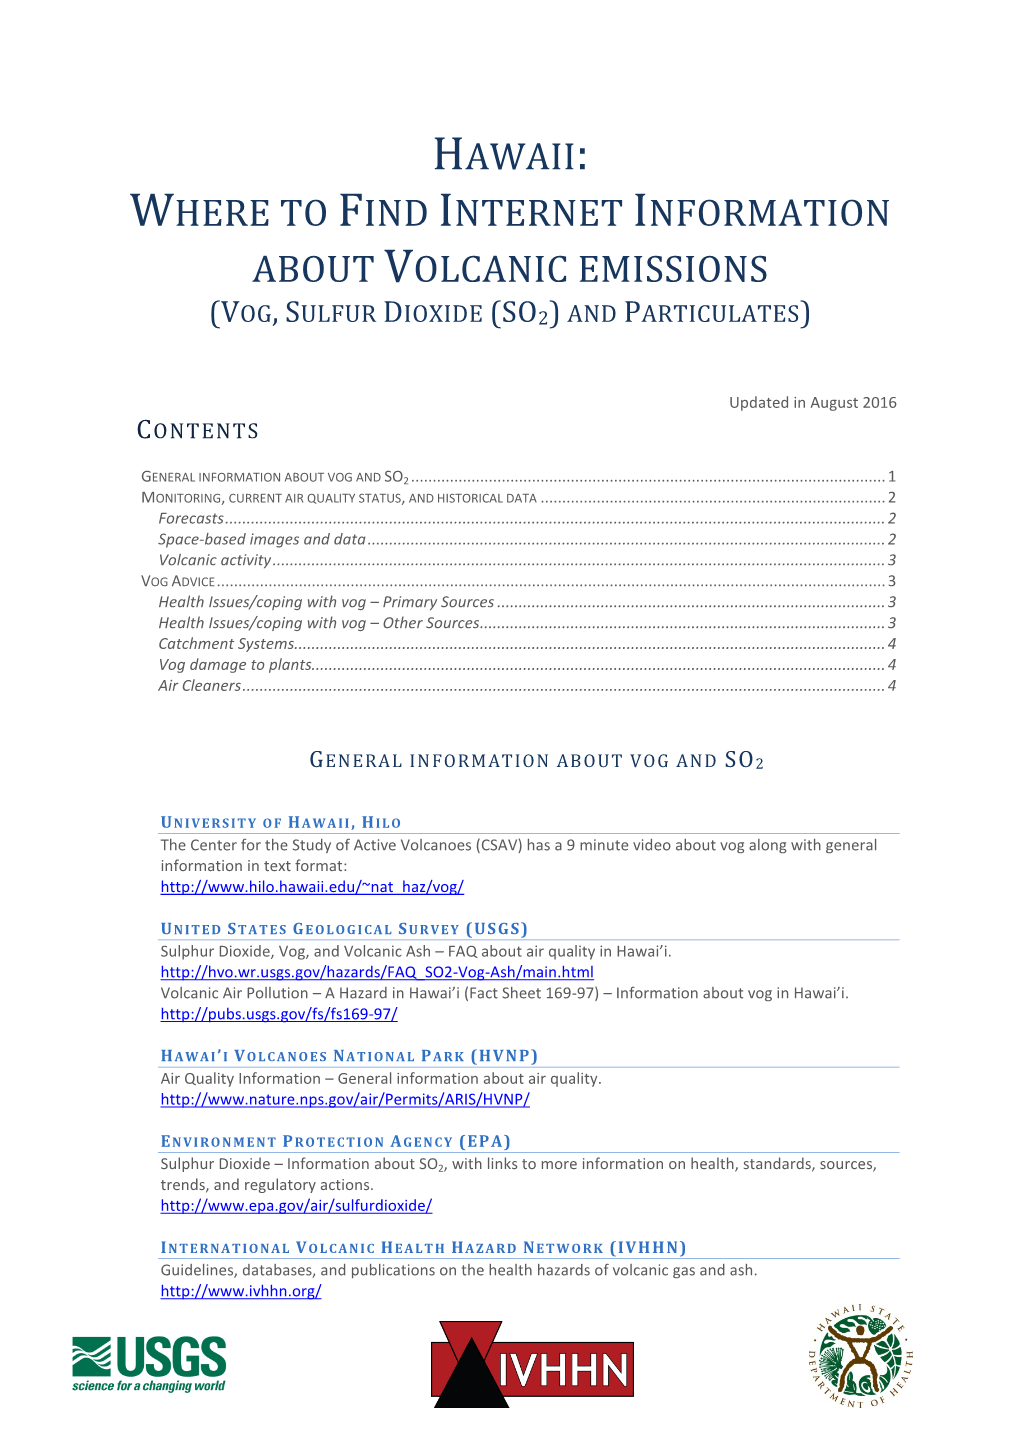 Hawaii: Where to Find Internet Information About Volcanic Emissions (Vog, Sulfur Dioxide (So2) and Particulates)